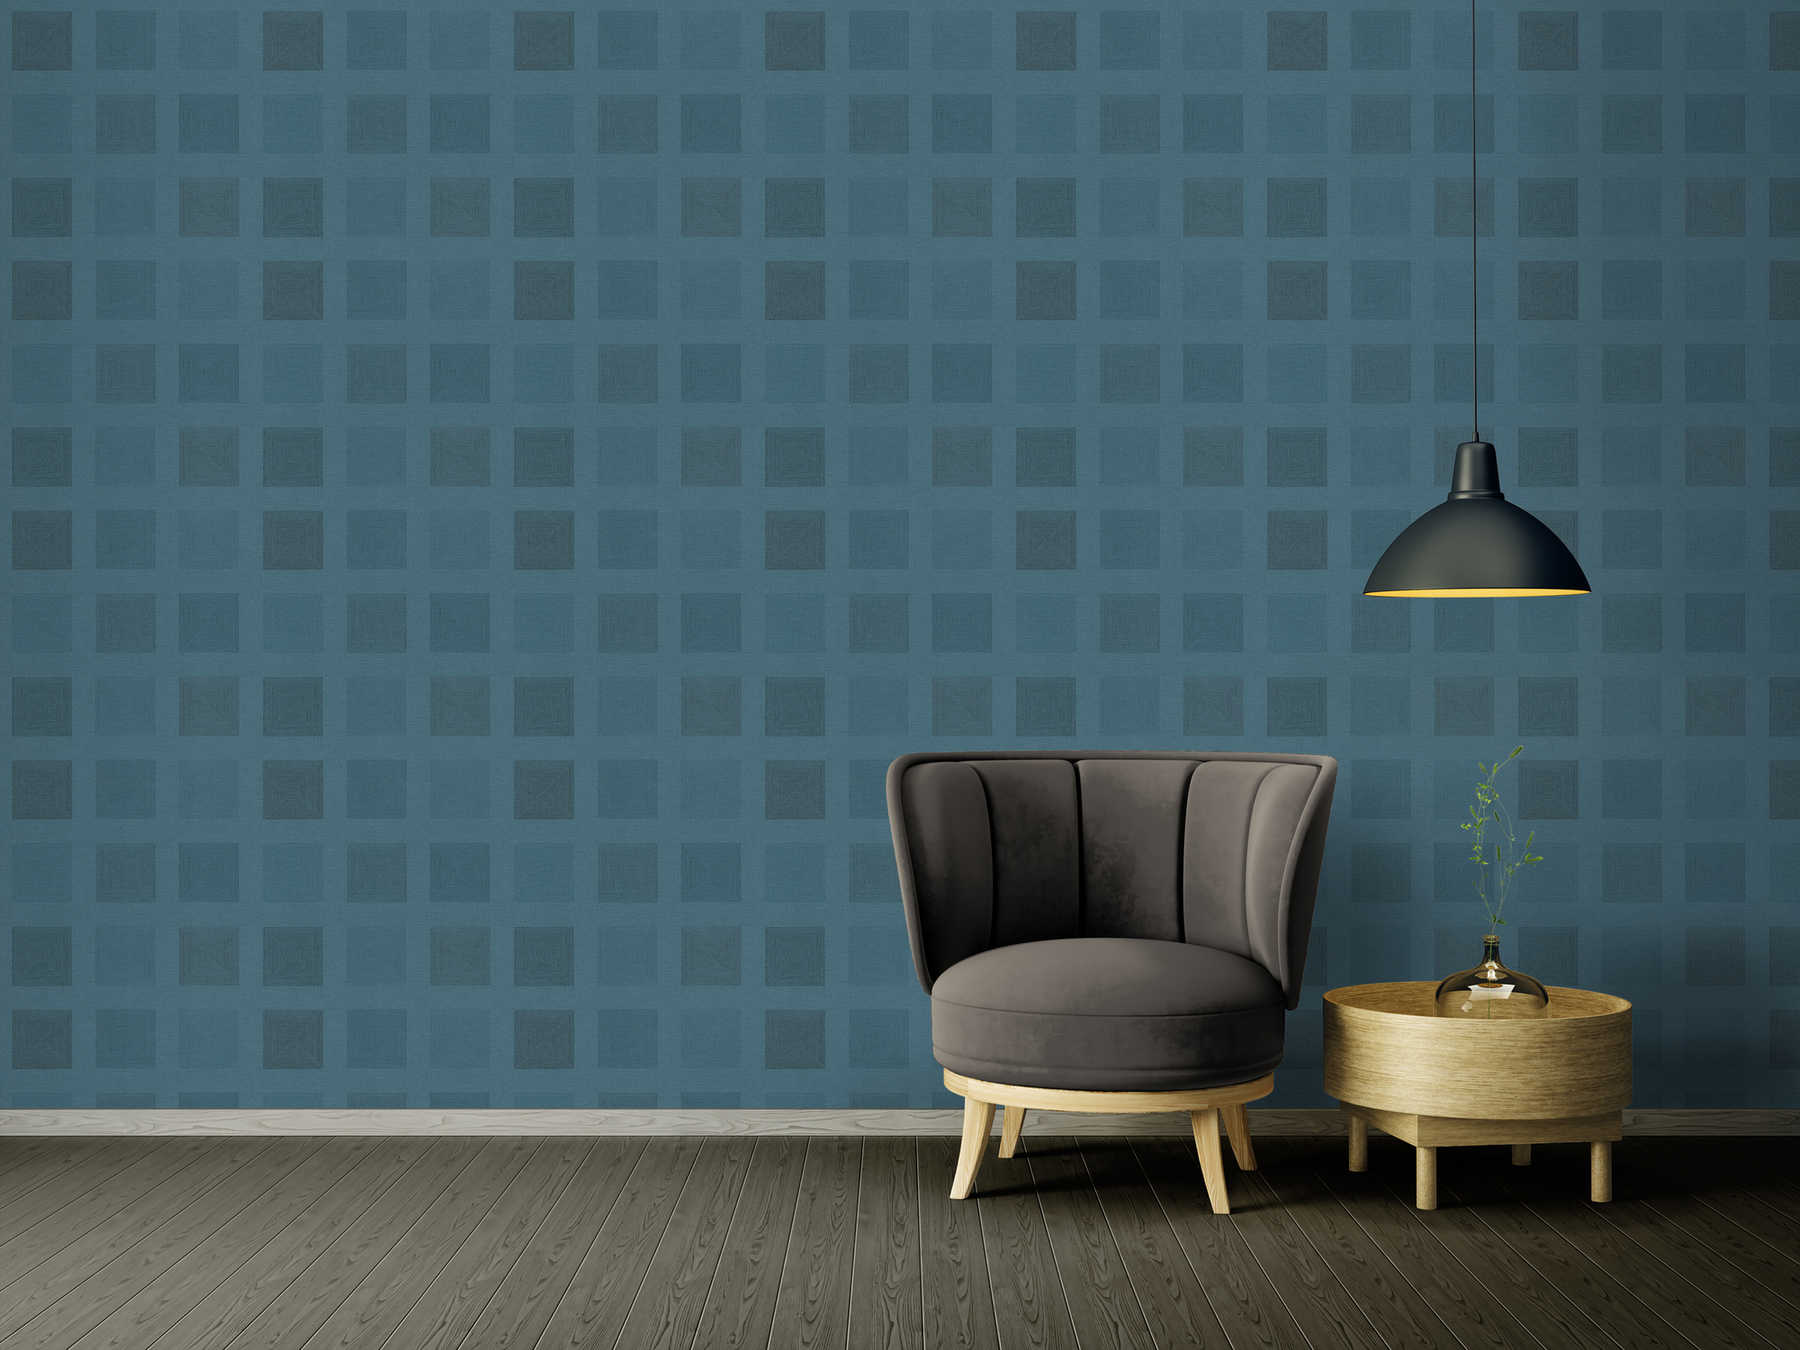             African wallpaper graphic pattern with metallic effect - blue
        